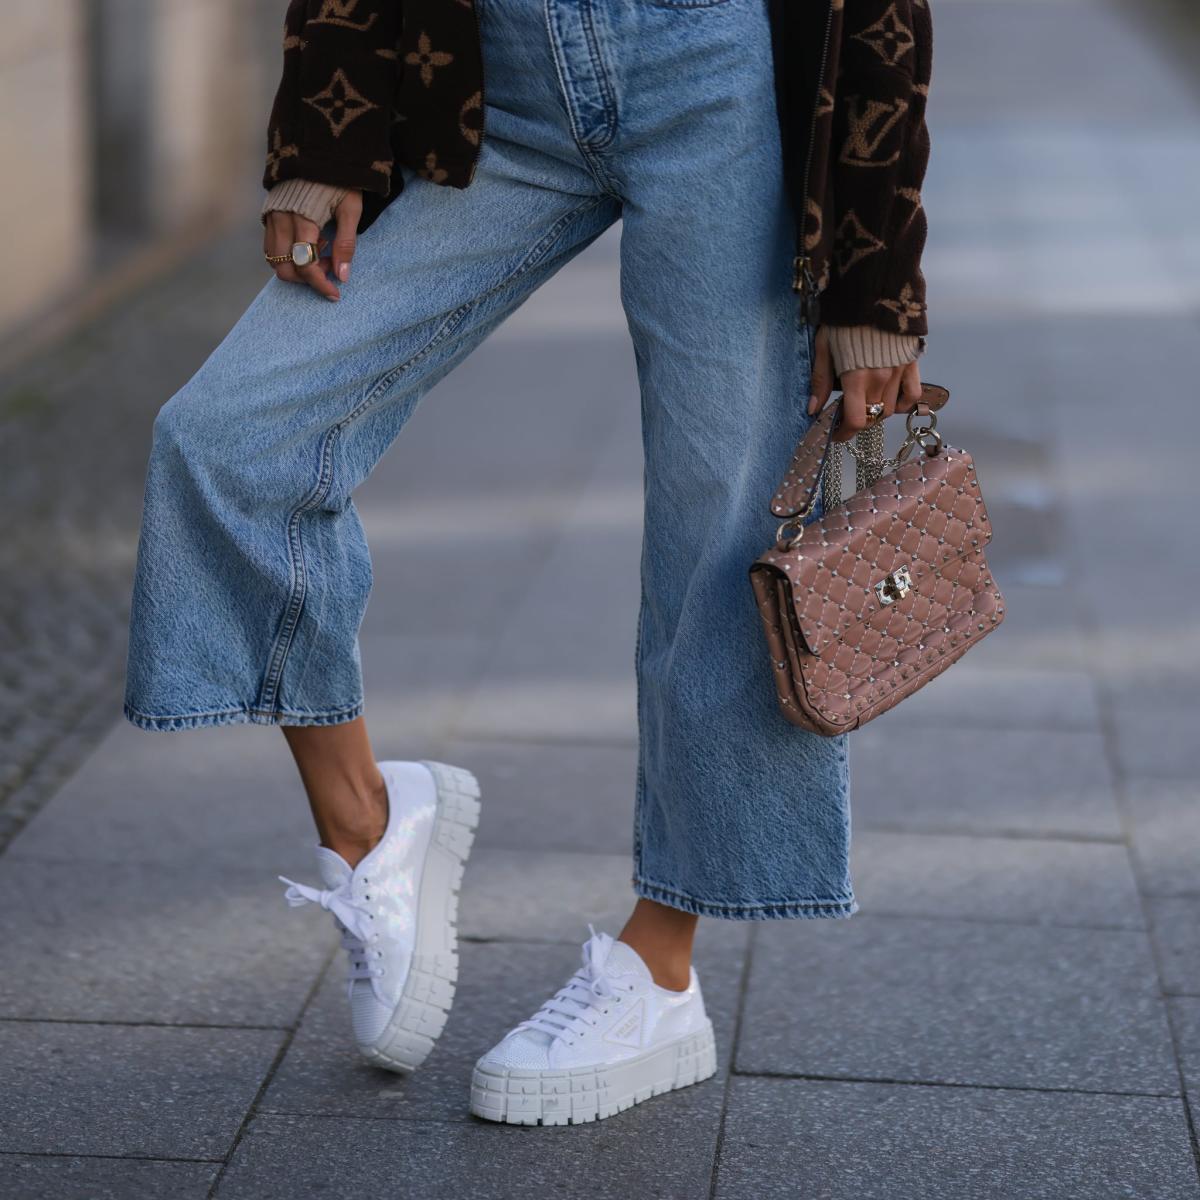 Sneakers Are Making a Comeback - Shop Our Favorites